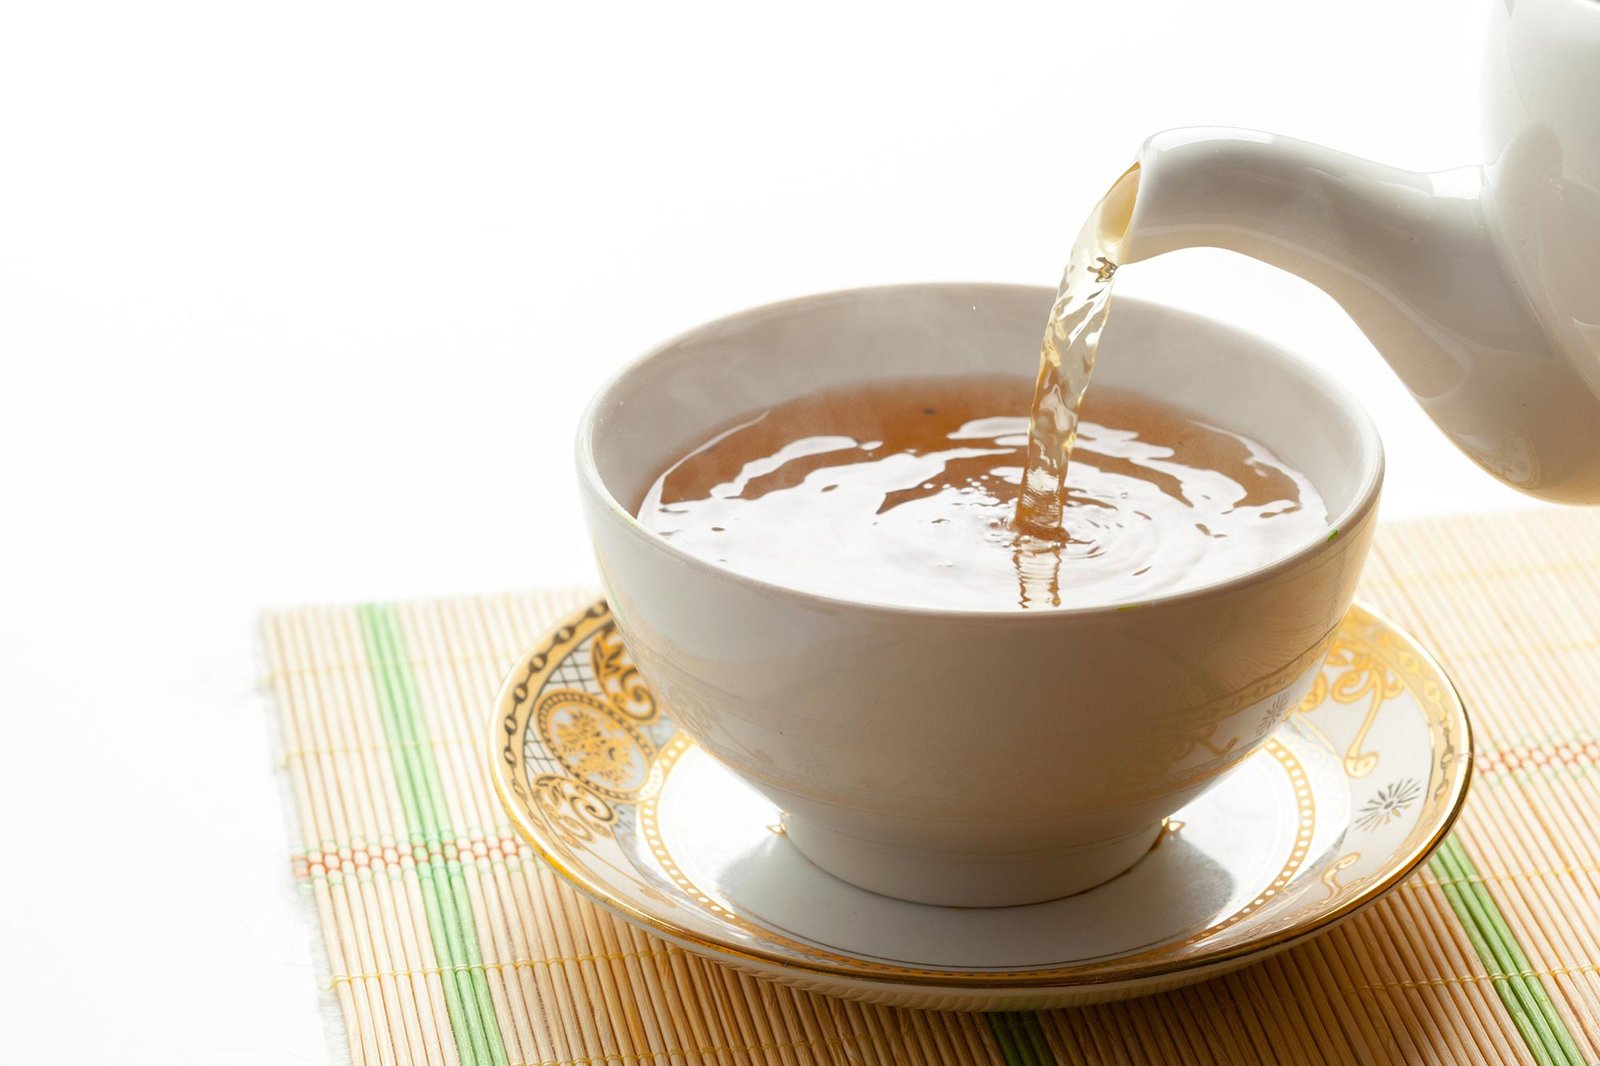 Can a Cup of Tea Keep COVID Away? Study Finds 99.9% Virus Reduction